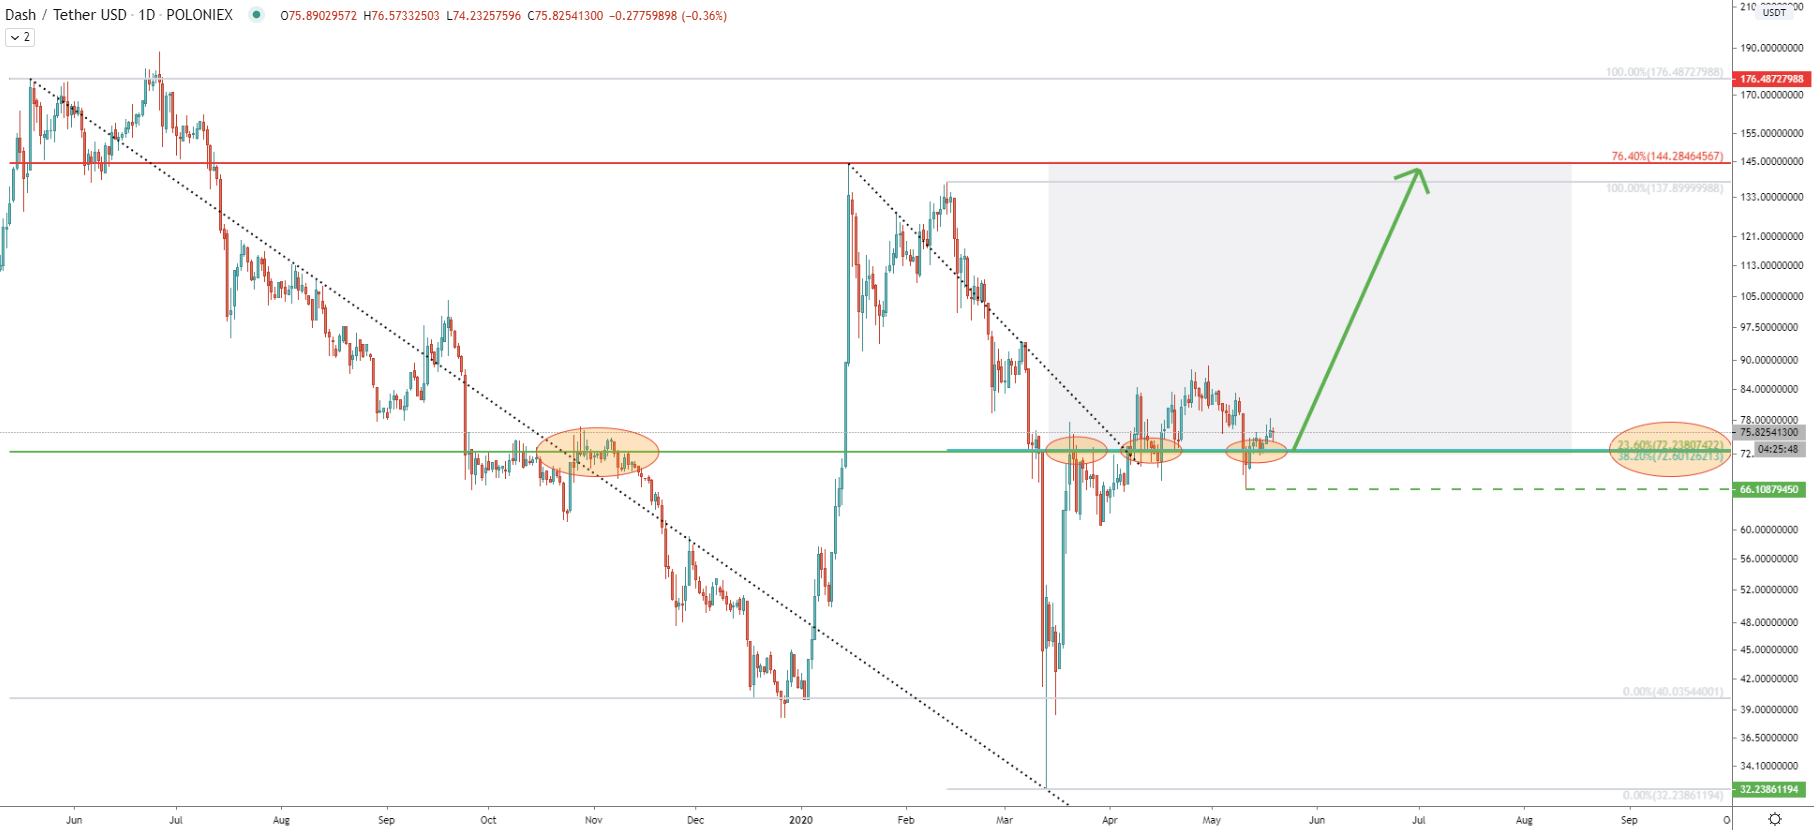 DASH/USDT Daily Technical Analysis 19 May 2020